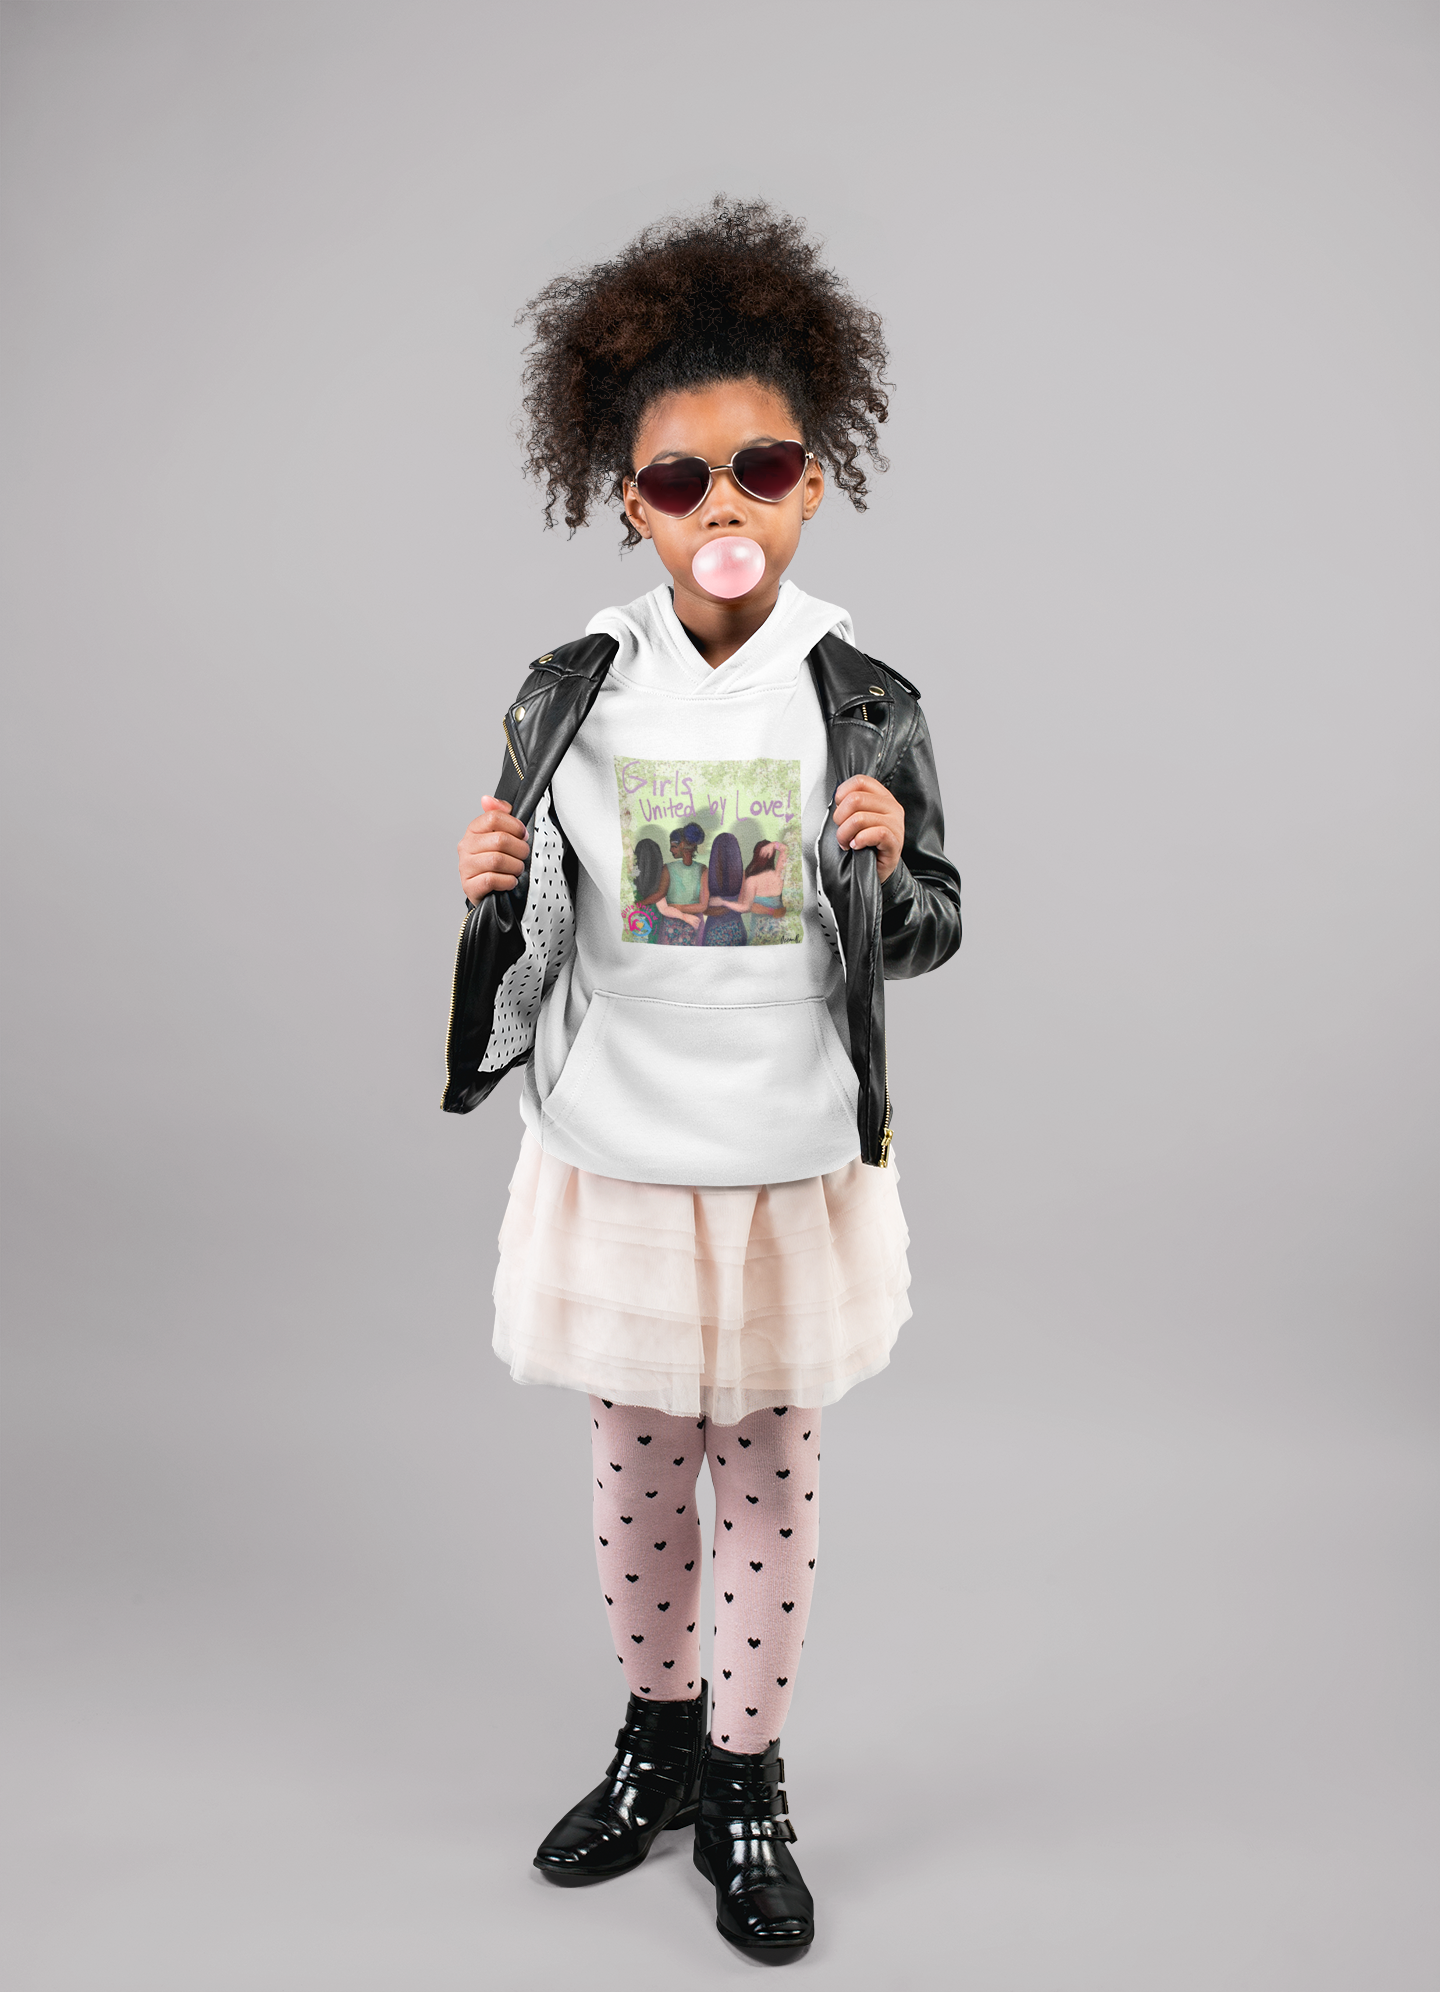 "Girl United By Love", Relaxed T-Shirt designed by Ocean Brown